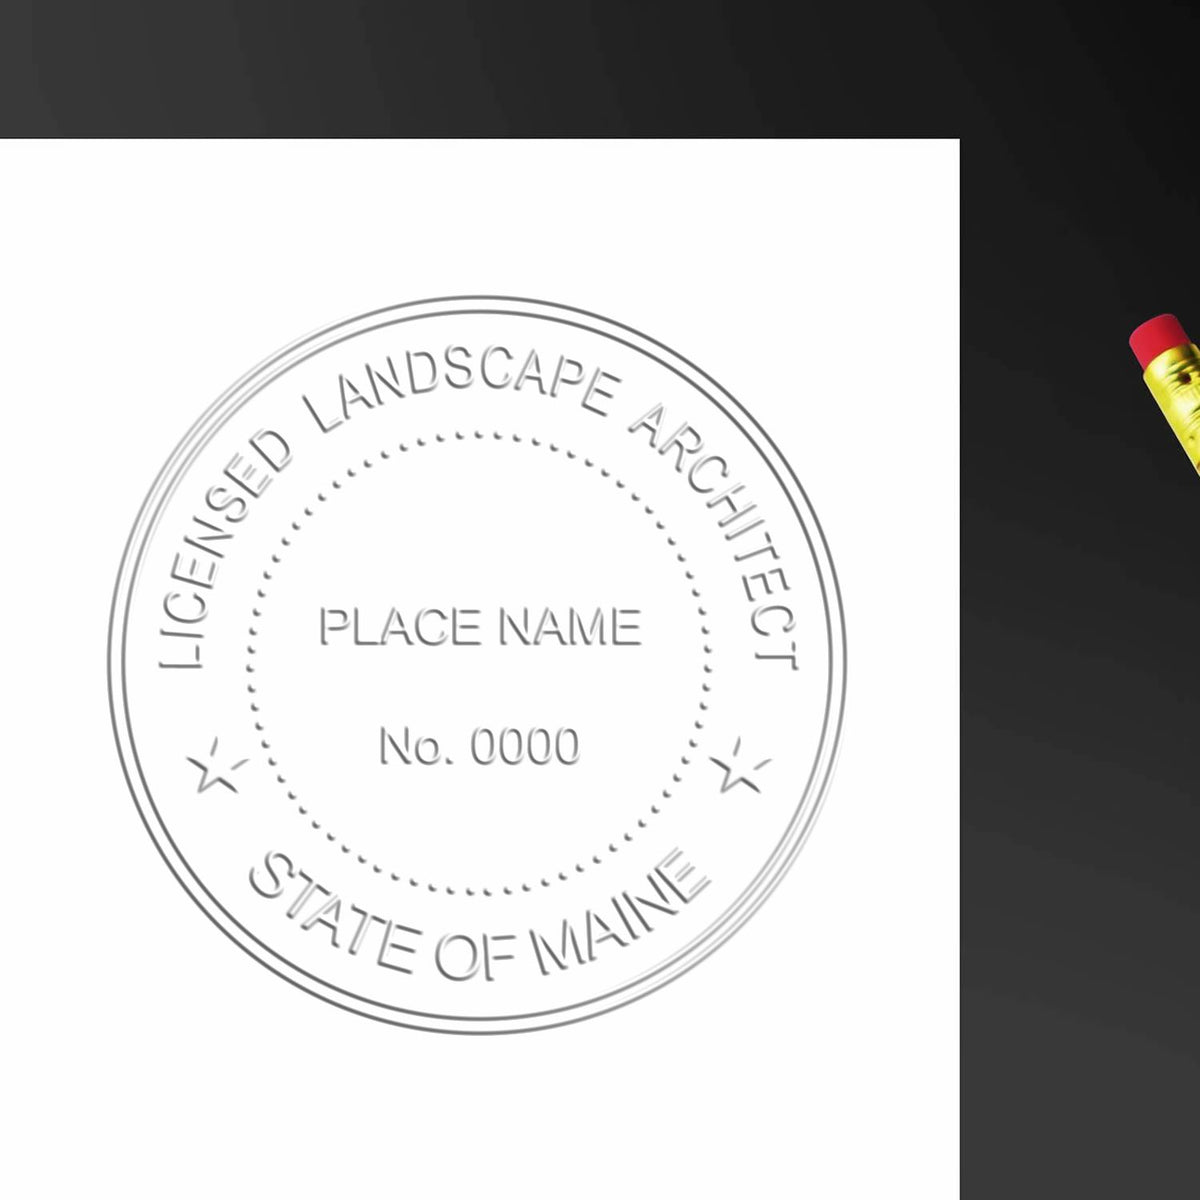 An in use photo of the Hybrid Maine Landscape Architect Seal showing a sample imprint on a cardstock